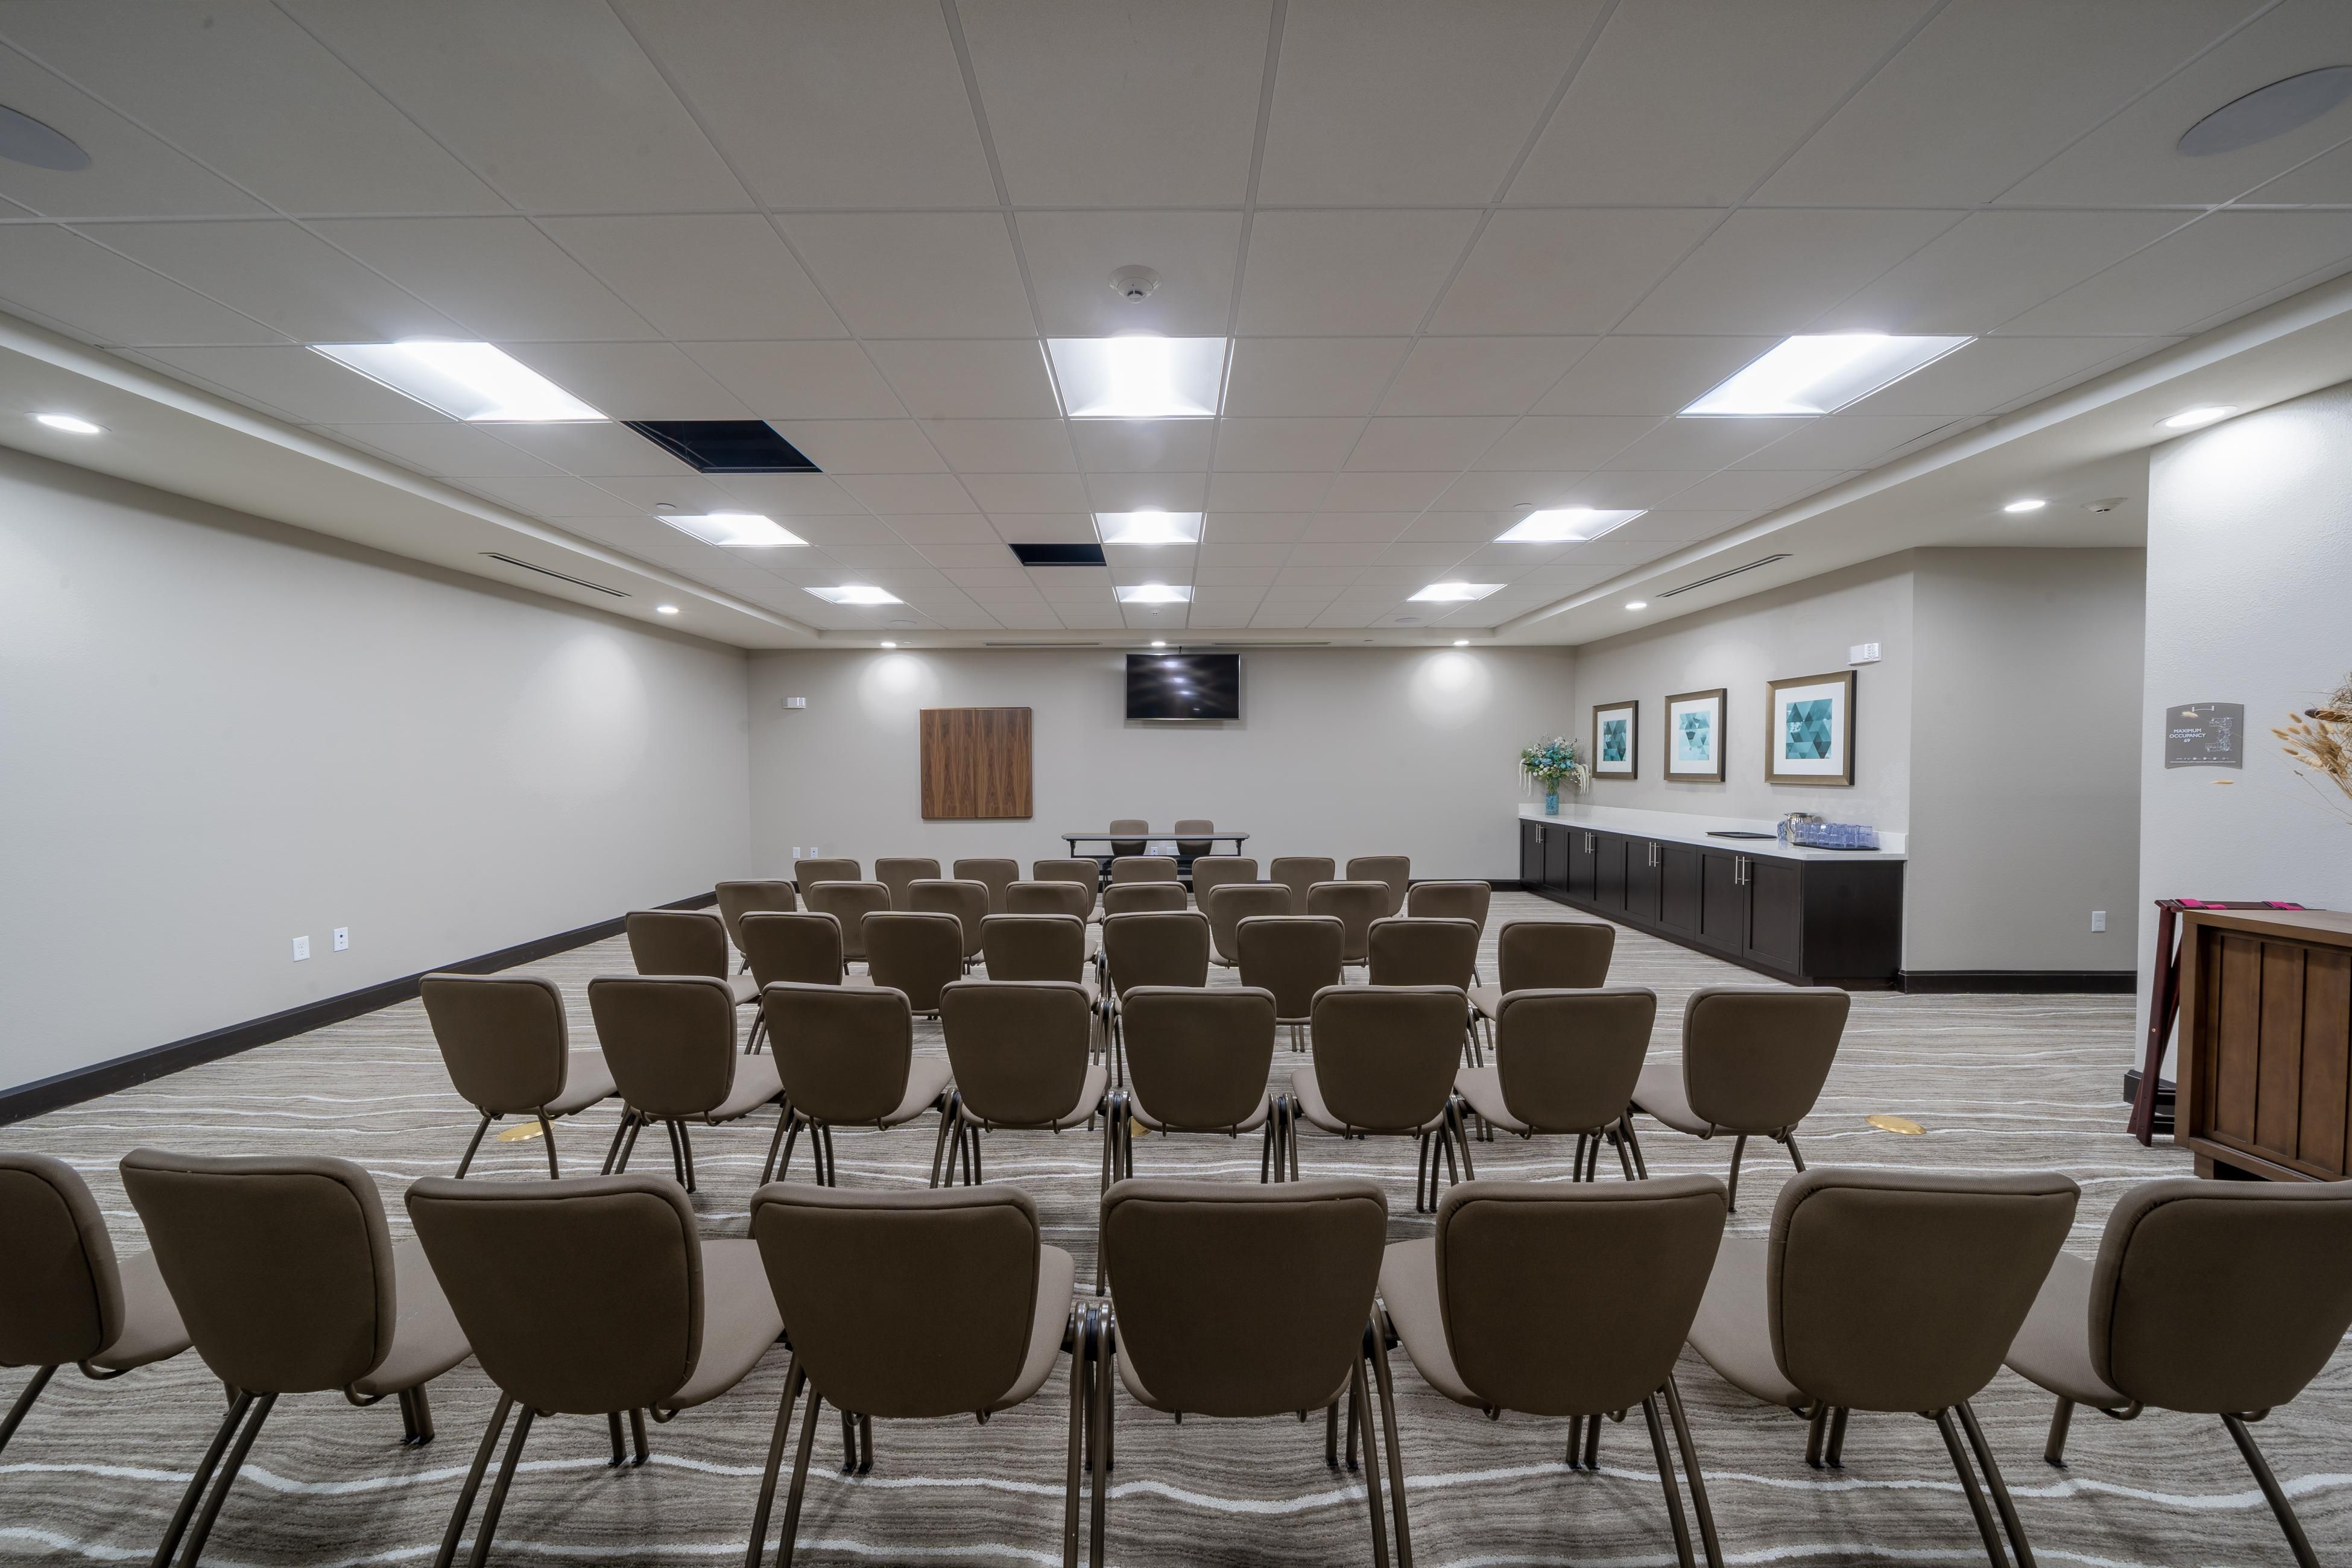 We have a 1000 sq ft meeting space to provide you the comforts of an intimate meeting with your company.